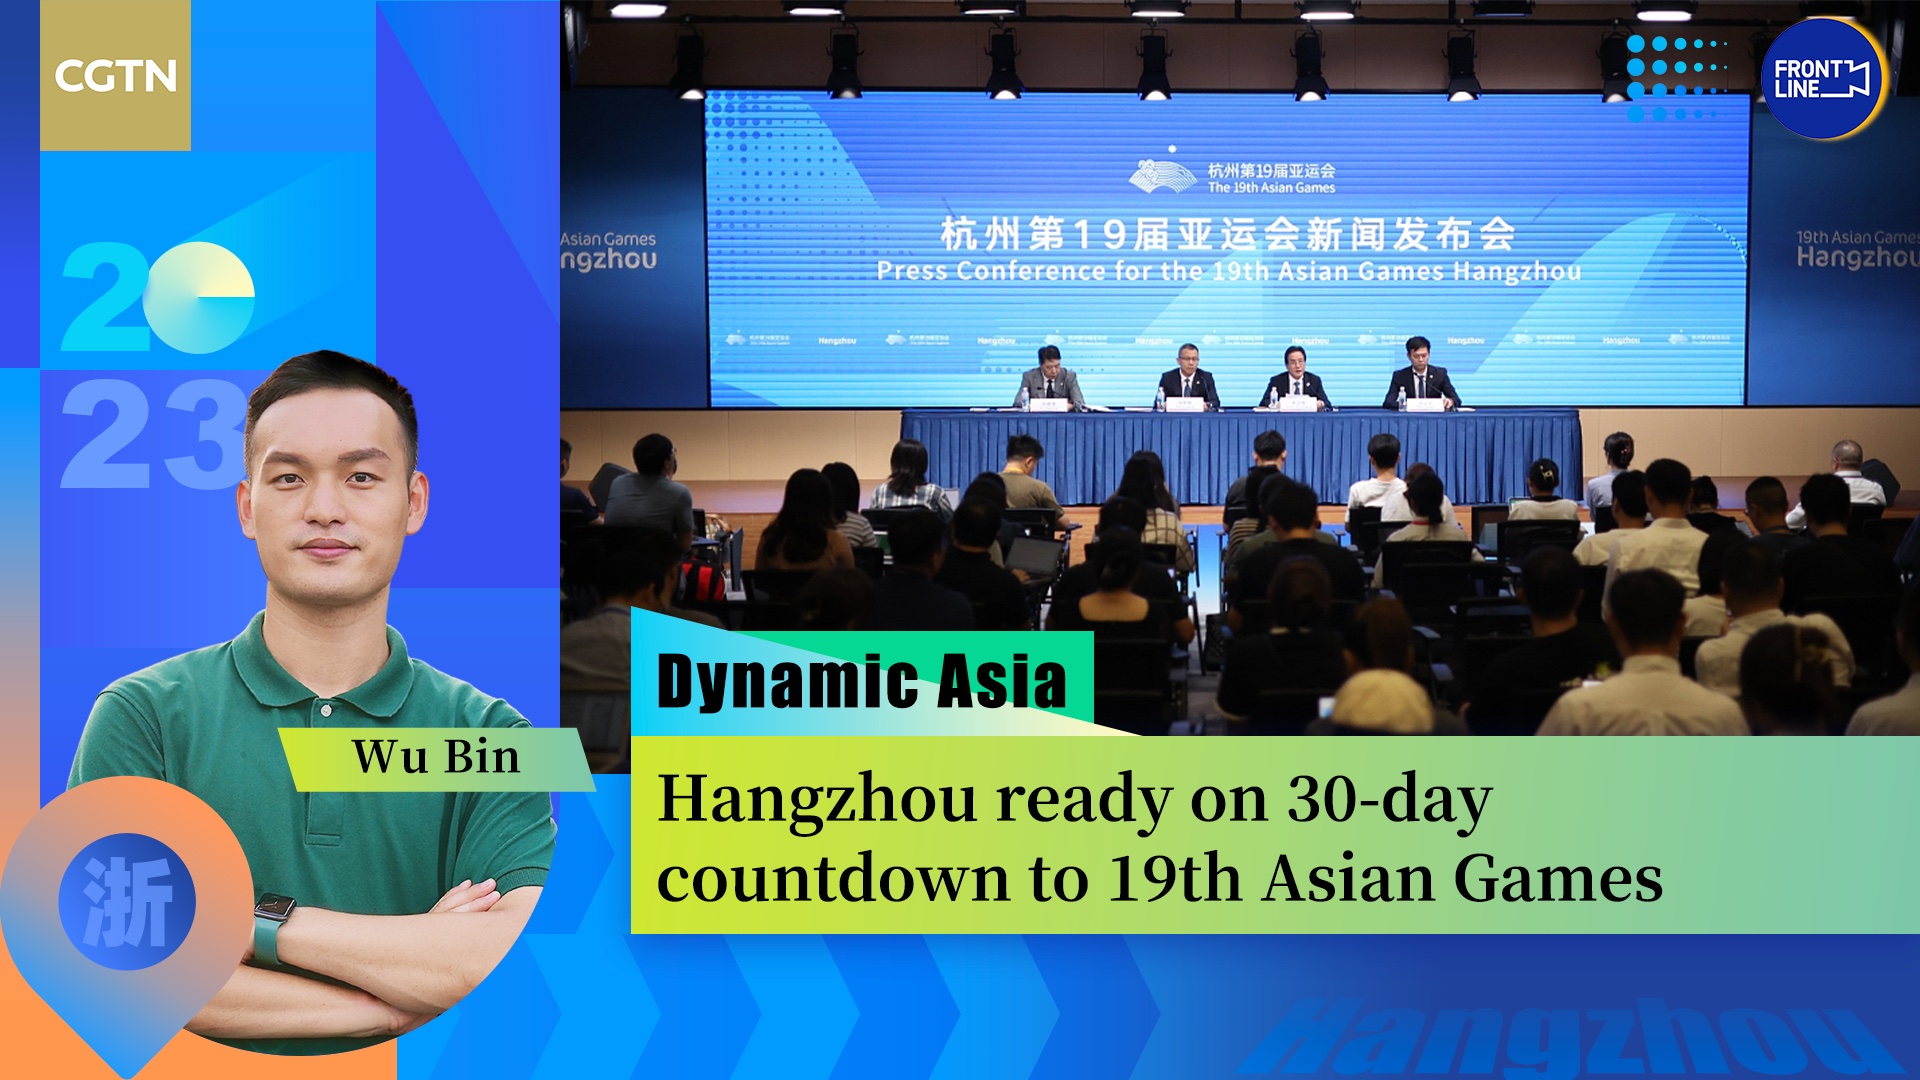 Dynamic Asia: Hangzhou ready on 30-day countdown to 19th Asian Games